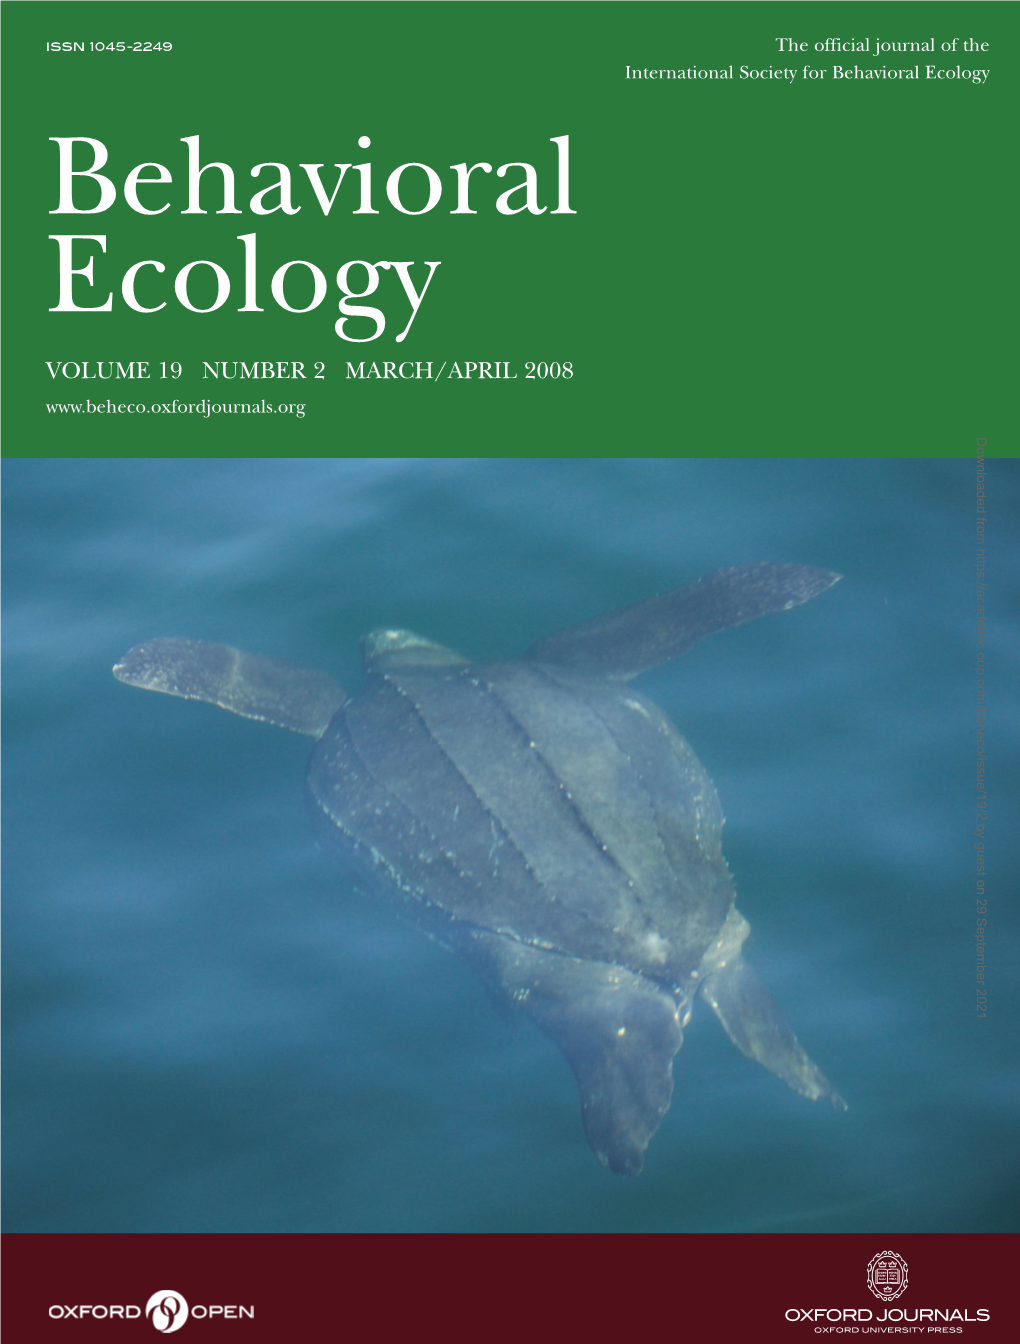 Behavioral Ecology Issn 1045-2249 the Official Journal of the International Society for Behavioral Ecology Volume 19 Number 2 March/April 2008